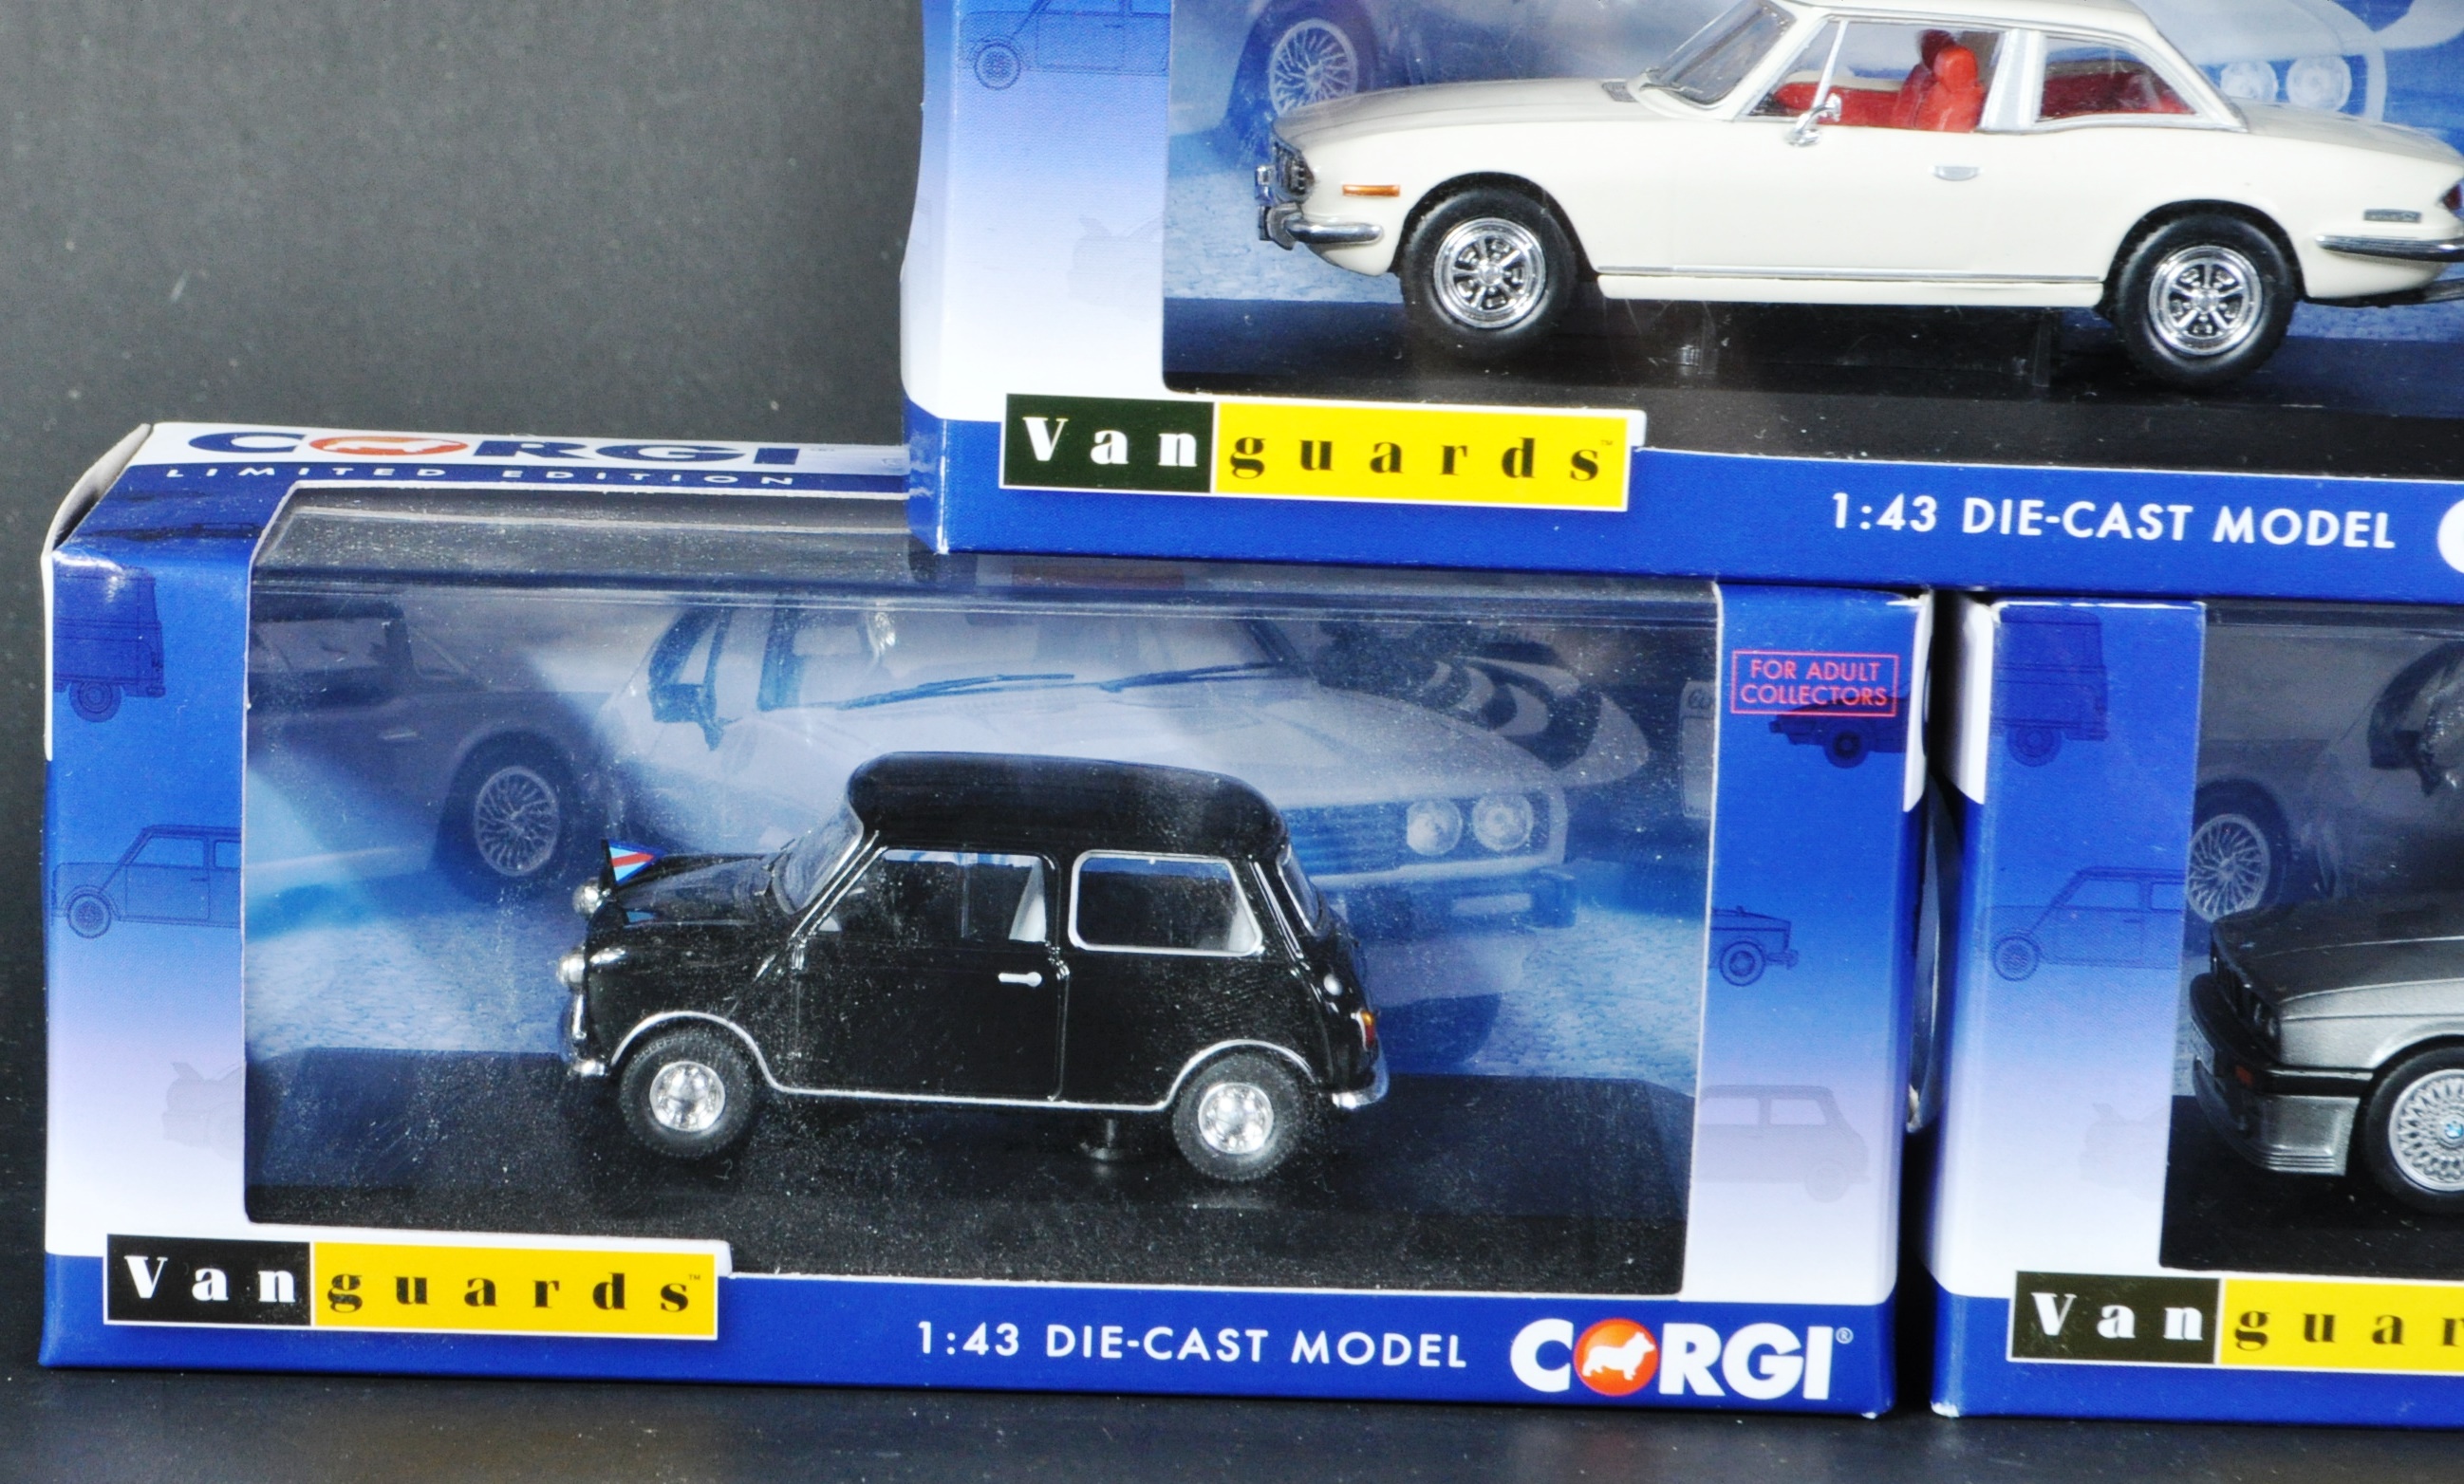 COLLECTION OF CORGI VANGUARDS 1/43 SCALE DIECAST MODEL CARS - Image 2 of 4